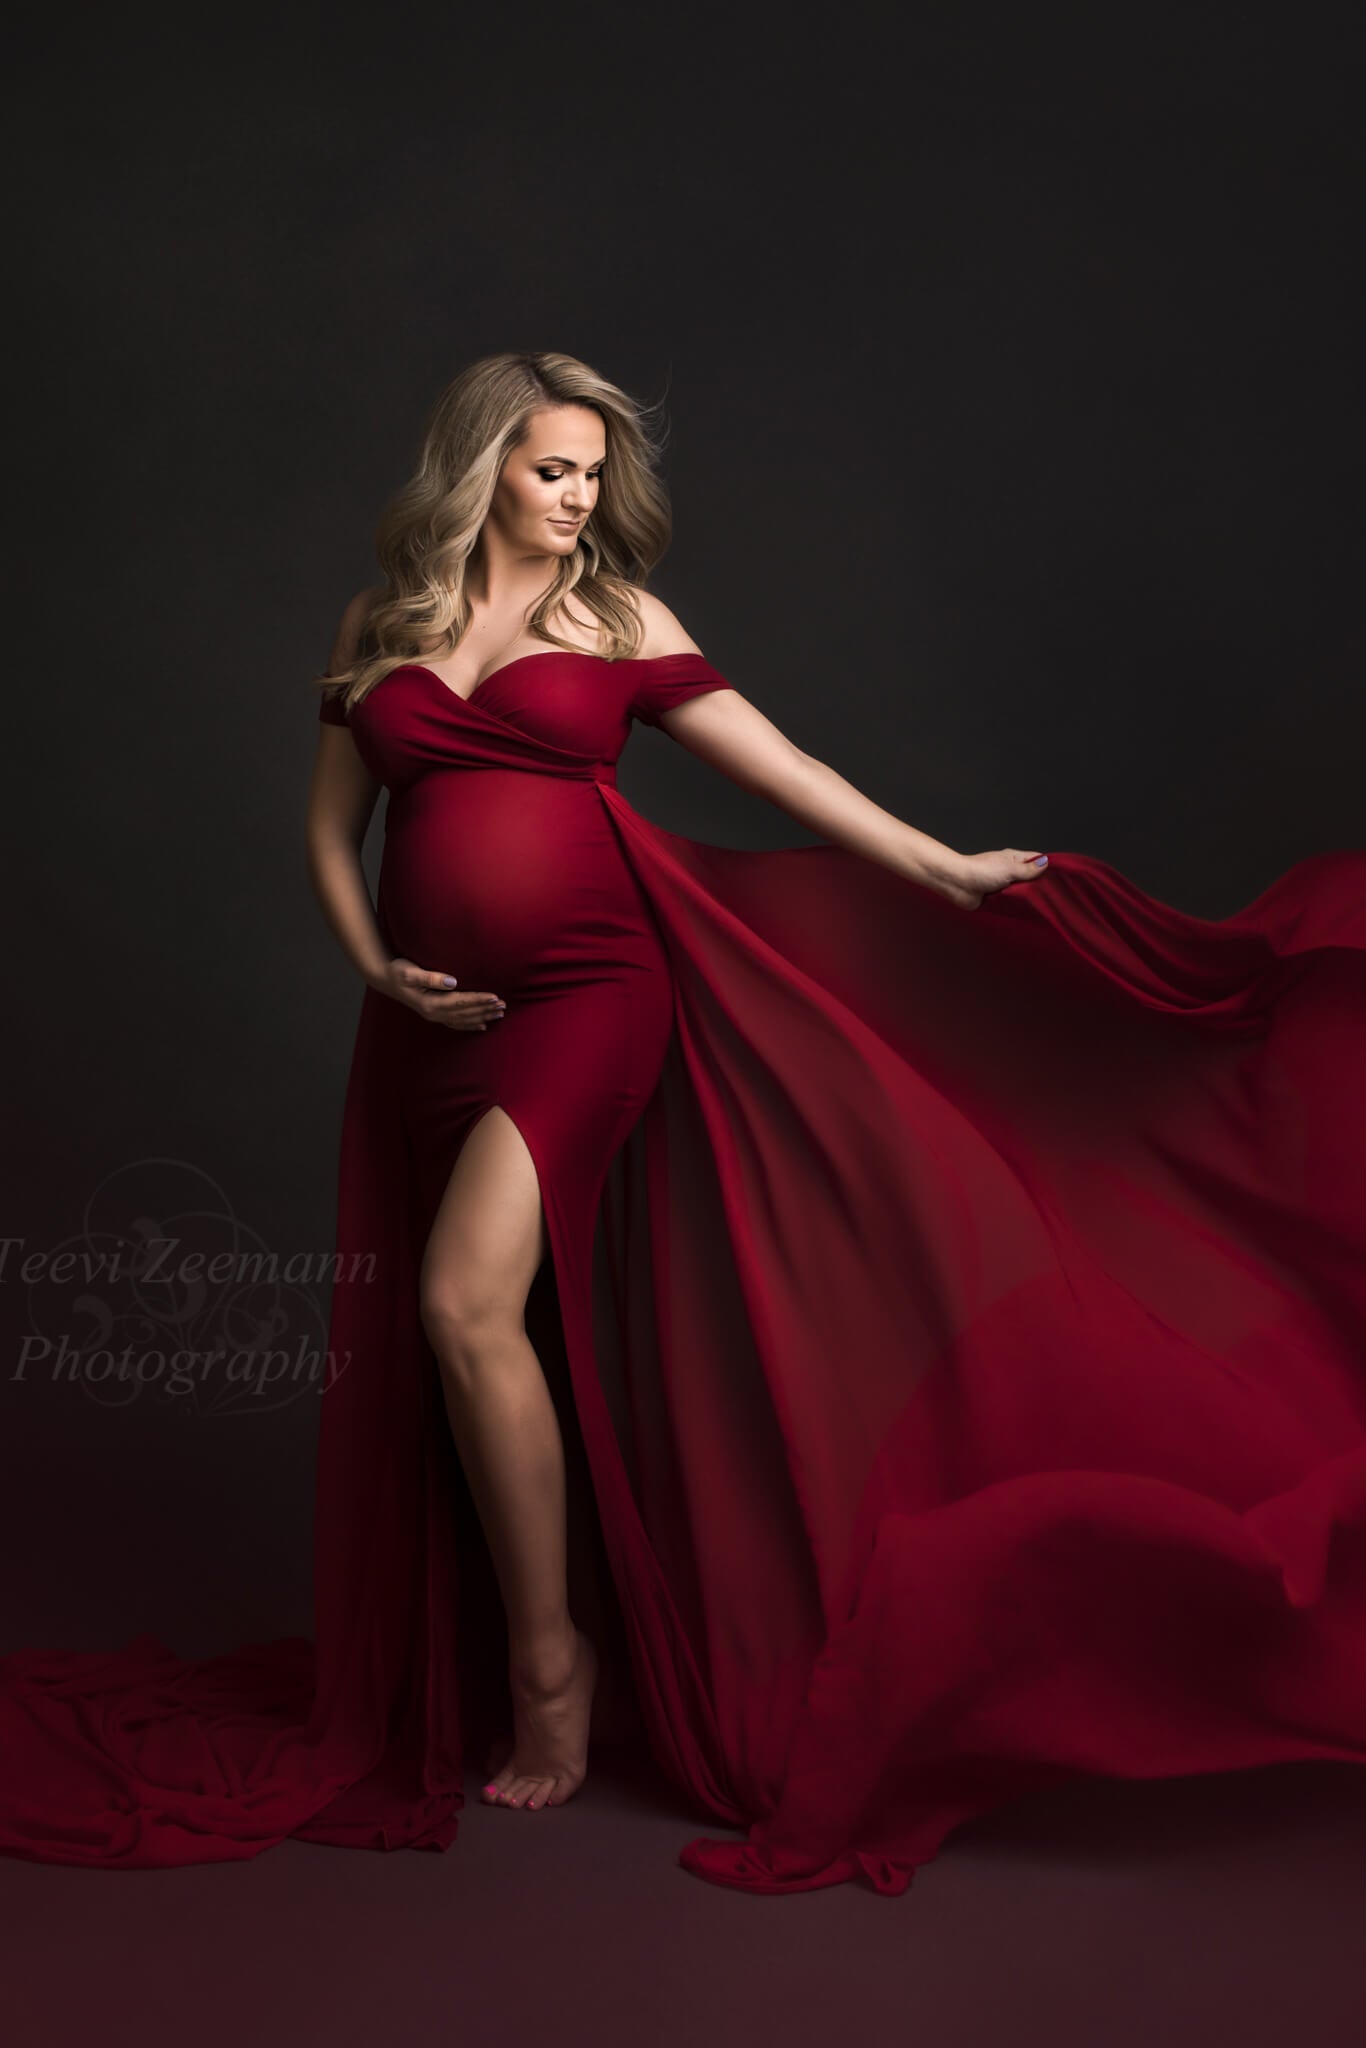 Blond pregnant model poses in a studio during a maternity photoshoot. She holds her bump with one hand while playing with the train from the dress with the other one. She wears a red dress with a side split and chiffon train.